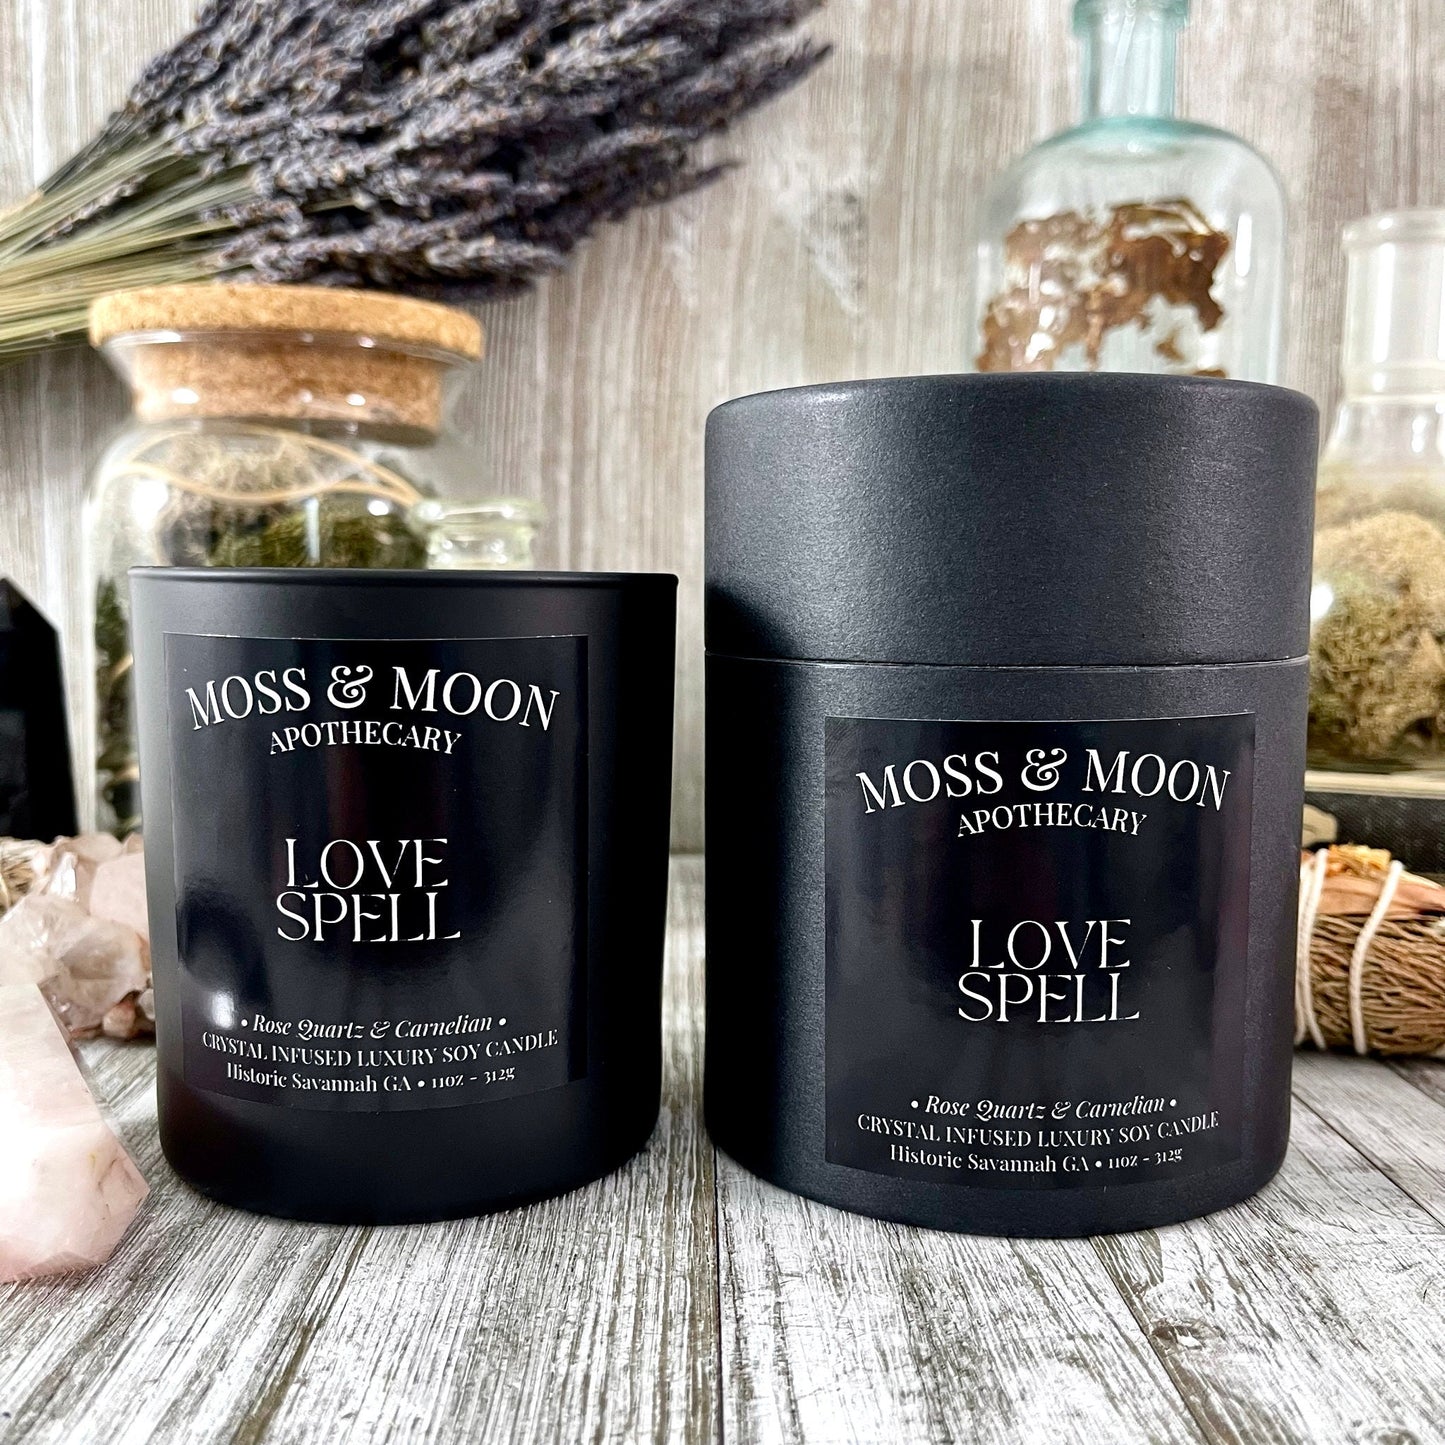 Love Spell Candle with Rose Quartz and Carnelian - Moss & Moon Apothecary Crystal Infused Luxury Soy Candle